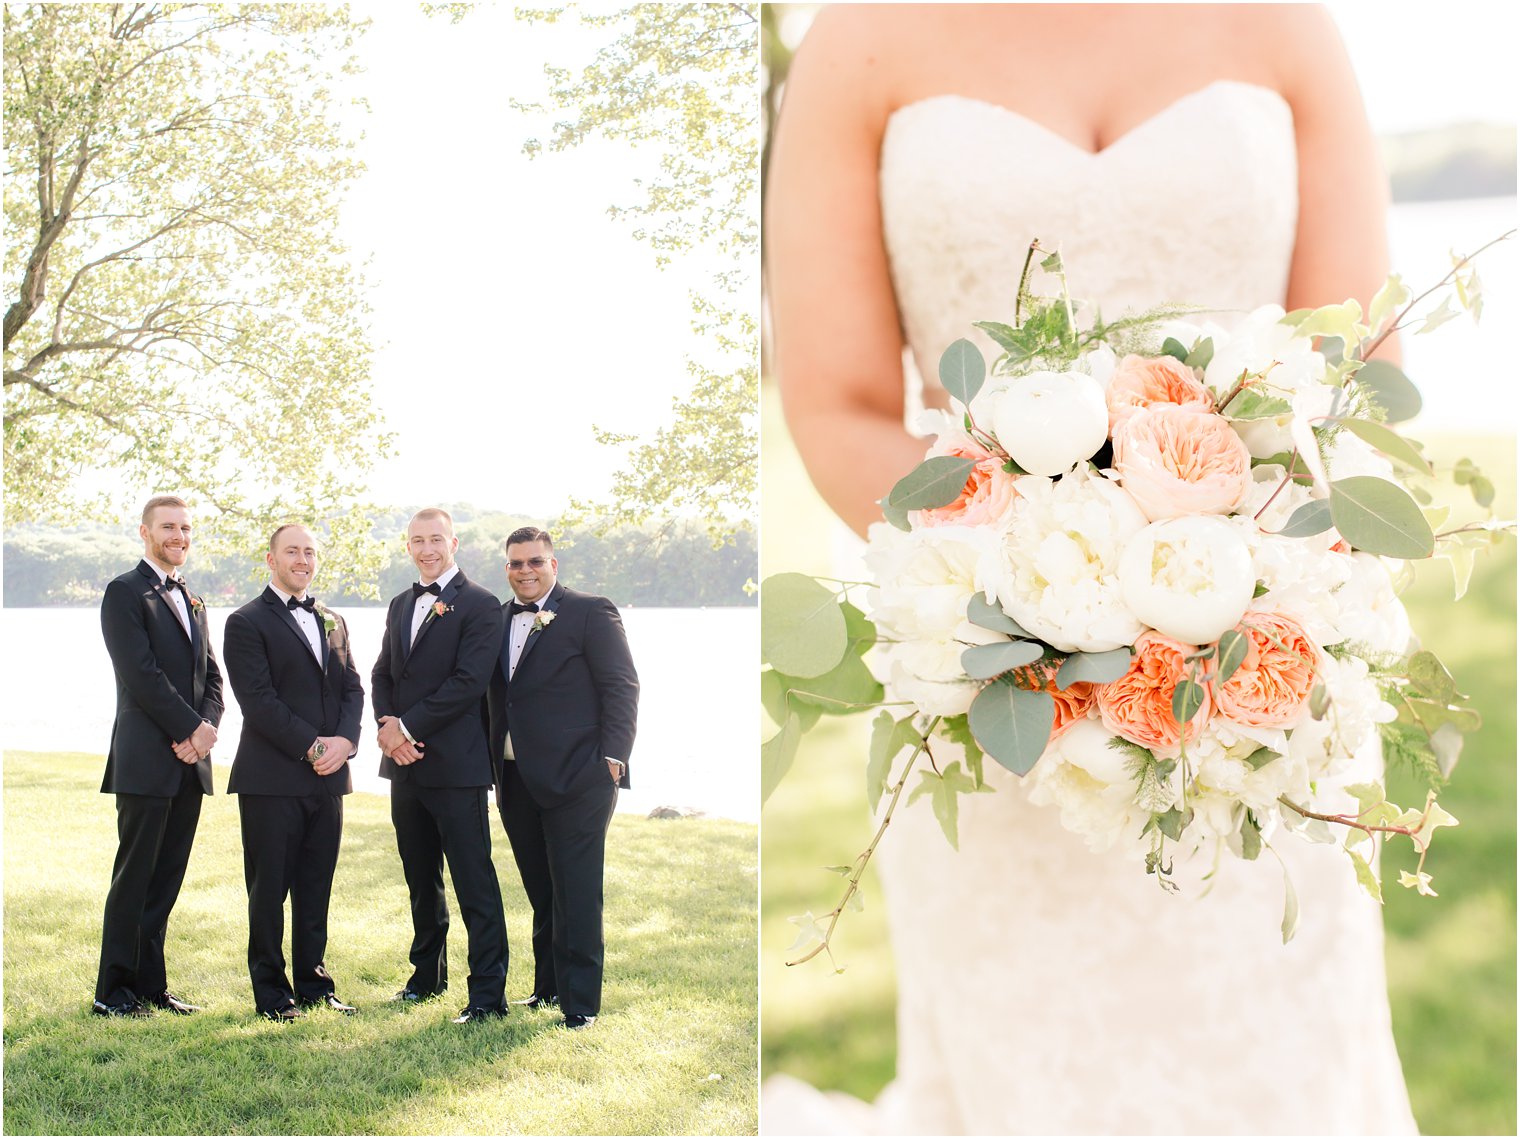 Bridal party photos at Indian Trail Club | Photos by Indian Trail Club Wedding Photographer Idalia Photography